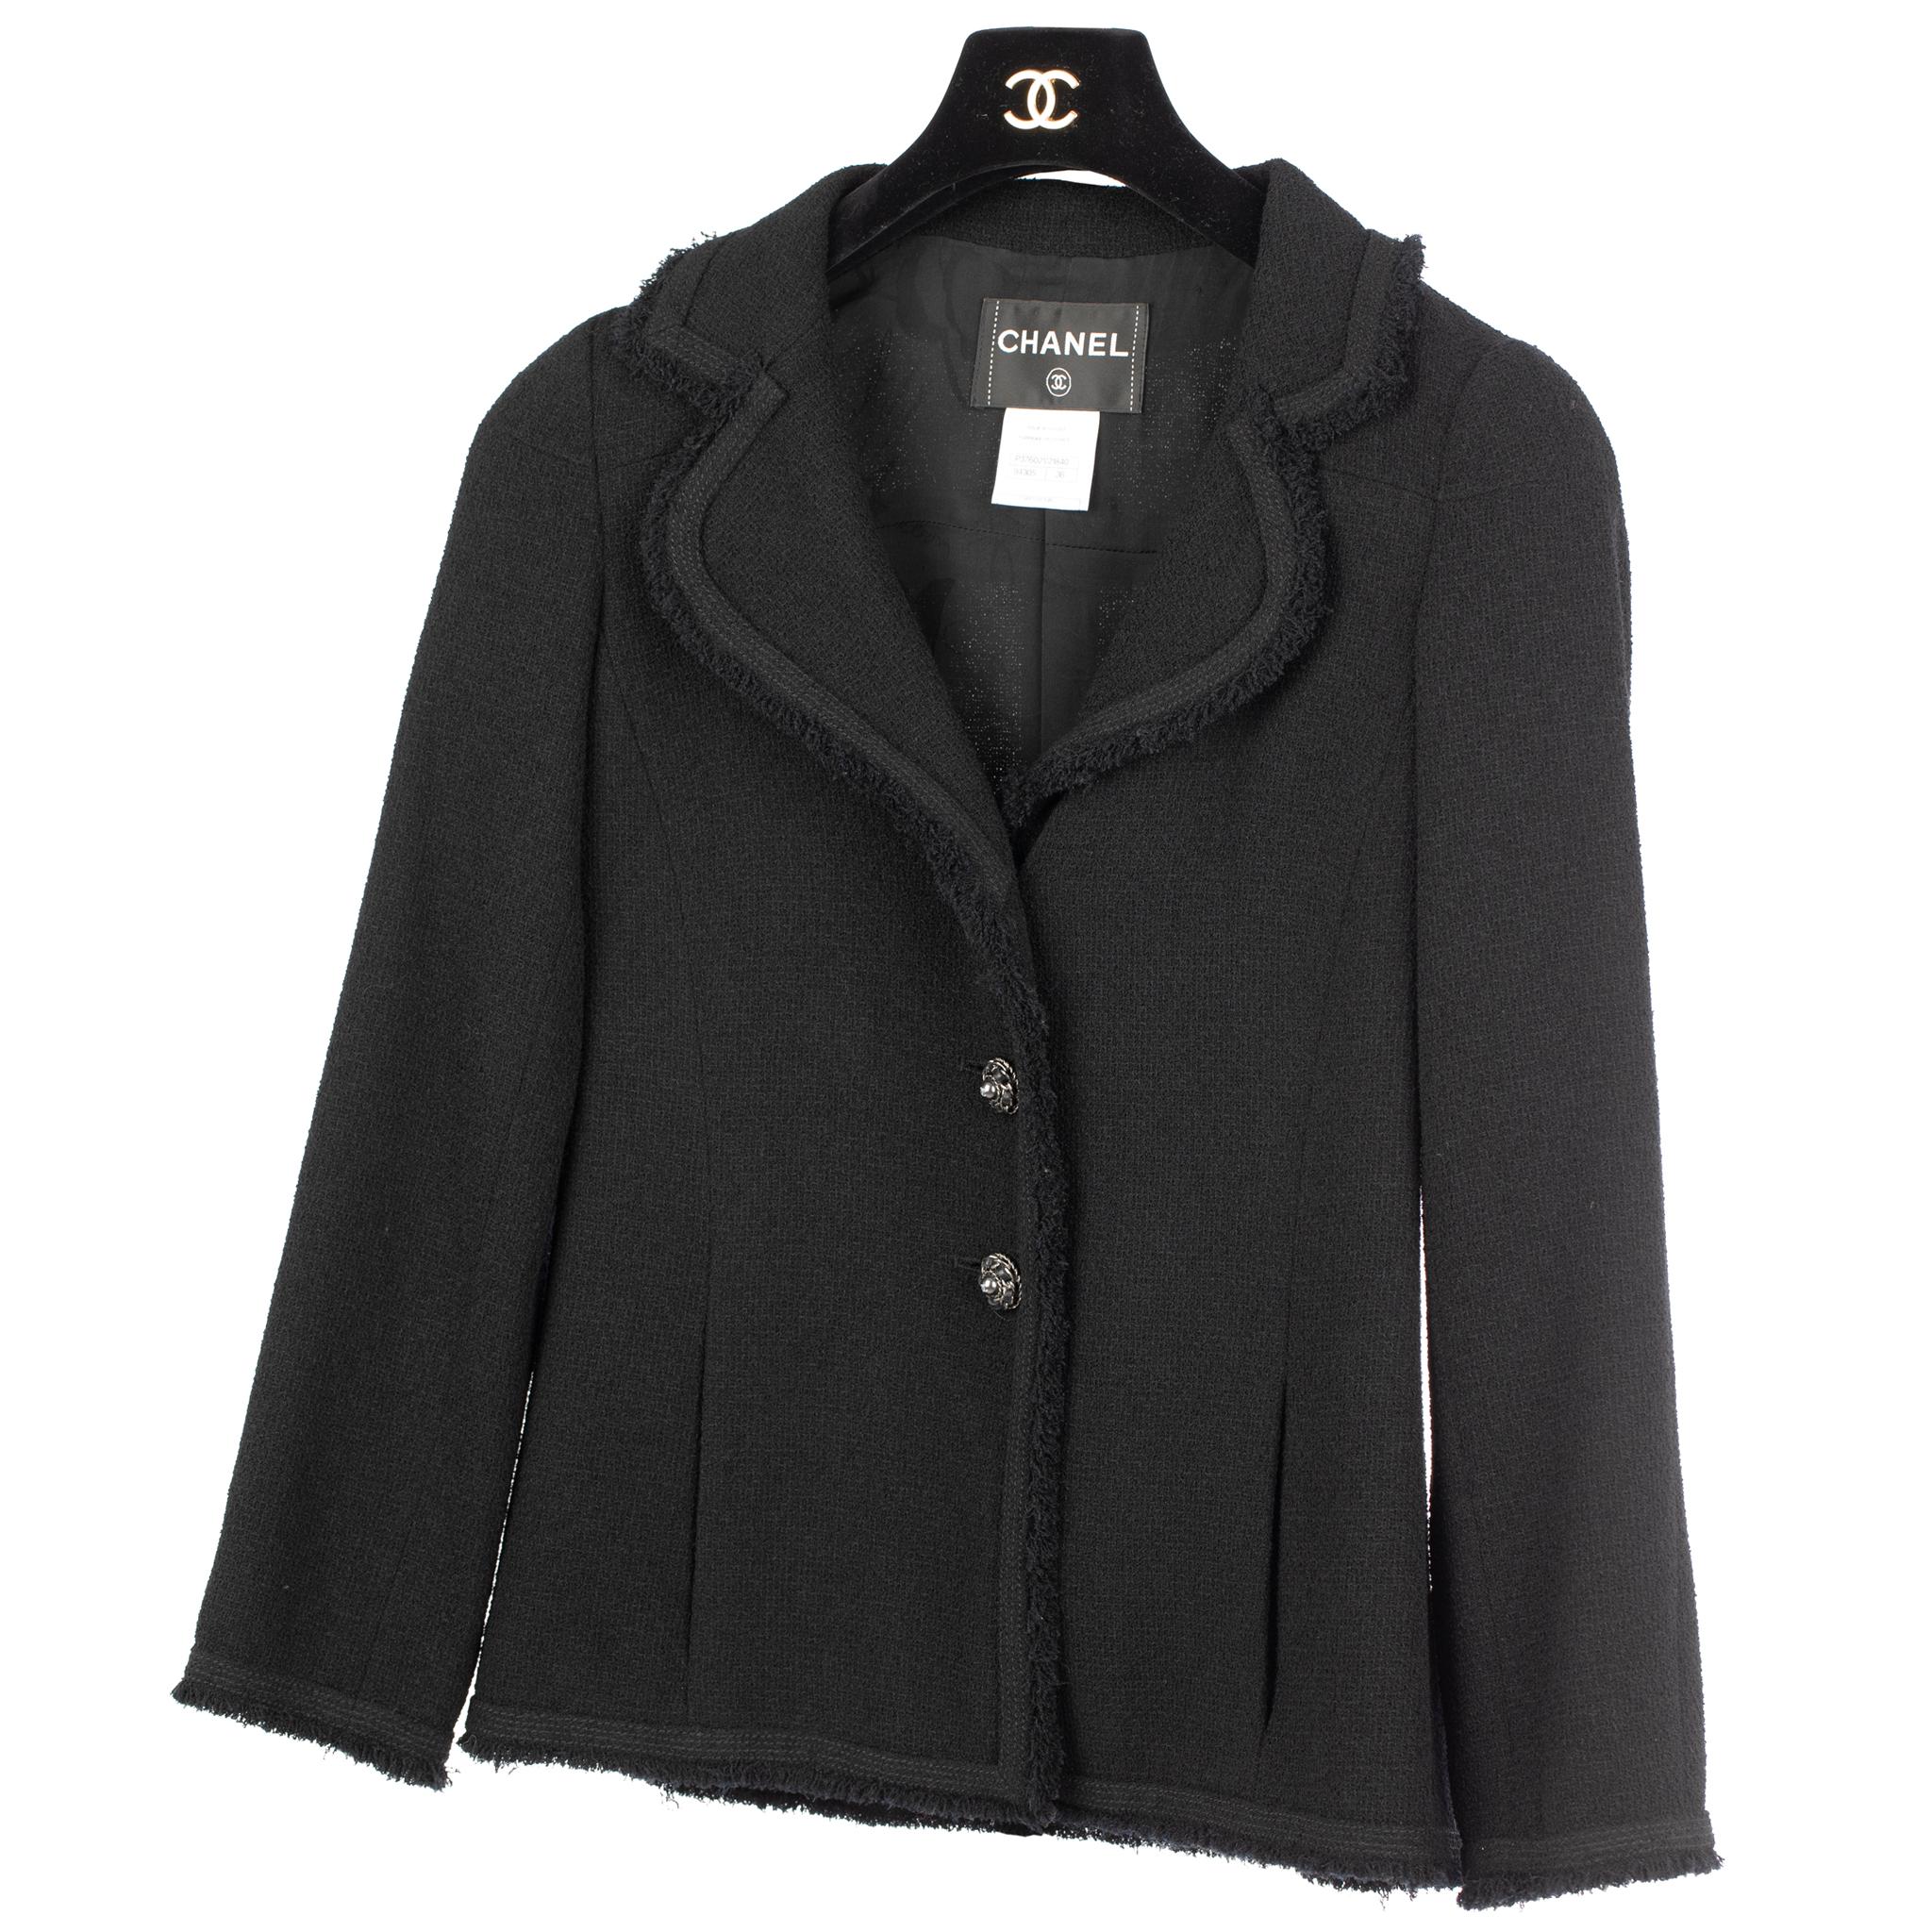 Women's Chanel Black Jacket With Ruthenium Buttons 36 FR